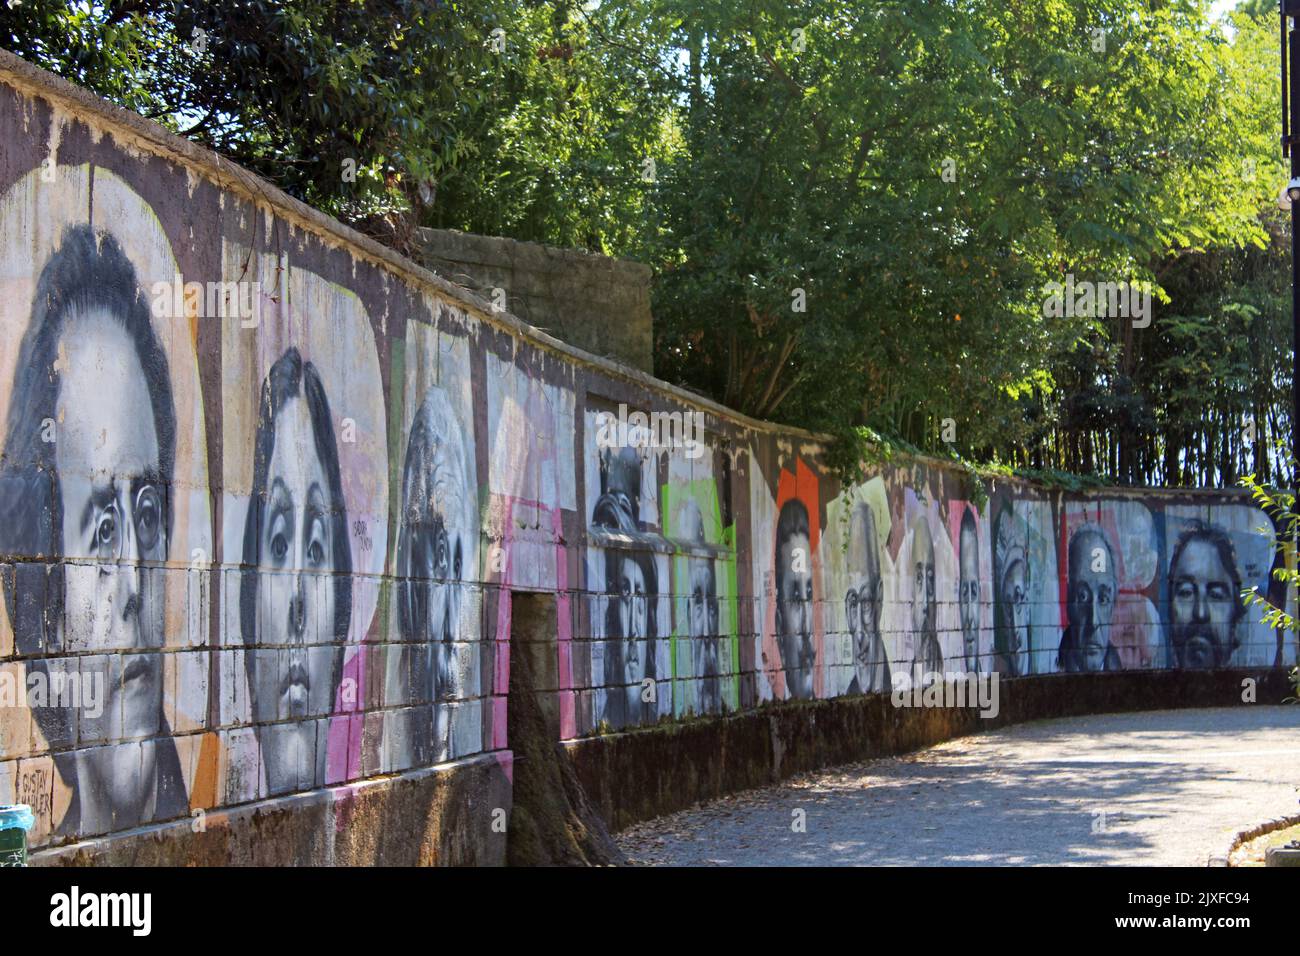 Famous landmarks, Opatija, well-known old public park Angiolina, the wall with murals of famous people, Adriatic coast, Kvarner bay, Croatia Stock Photo